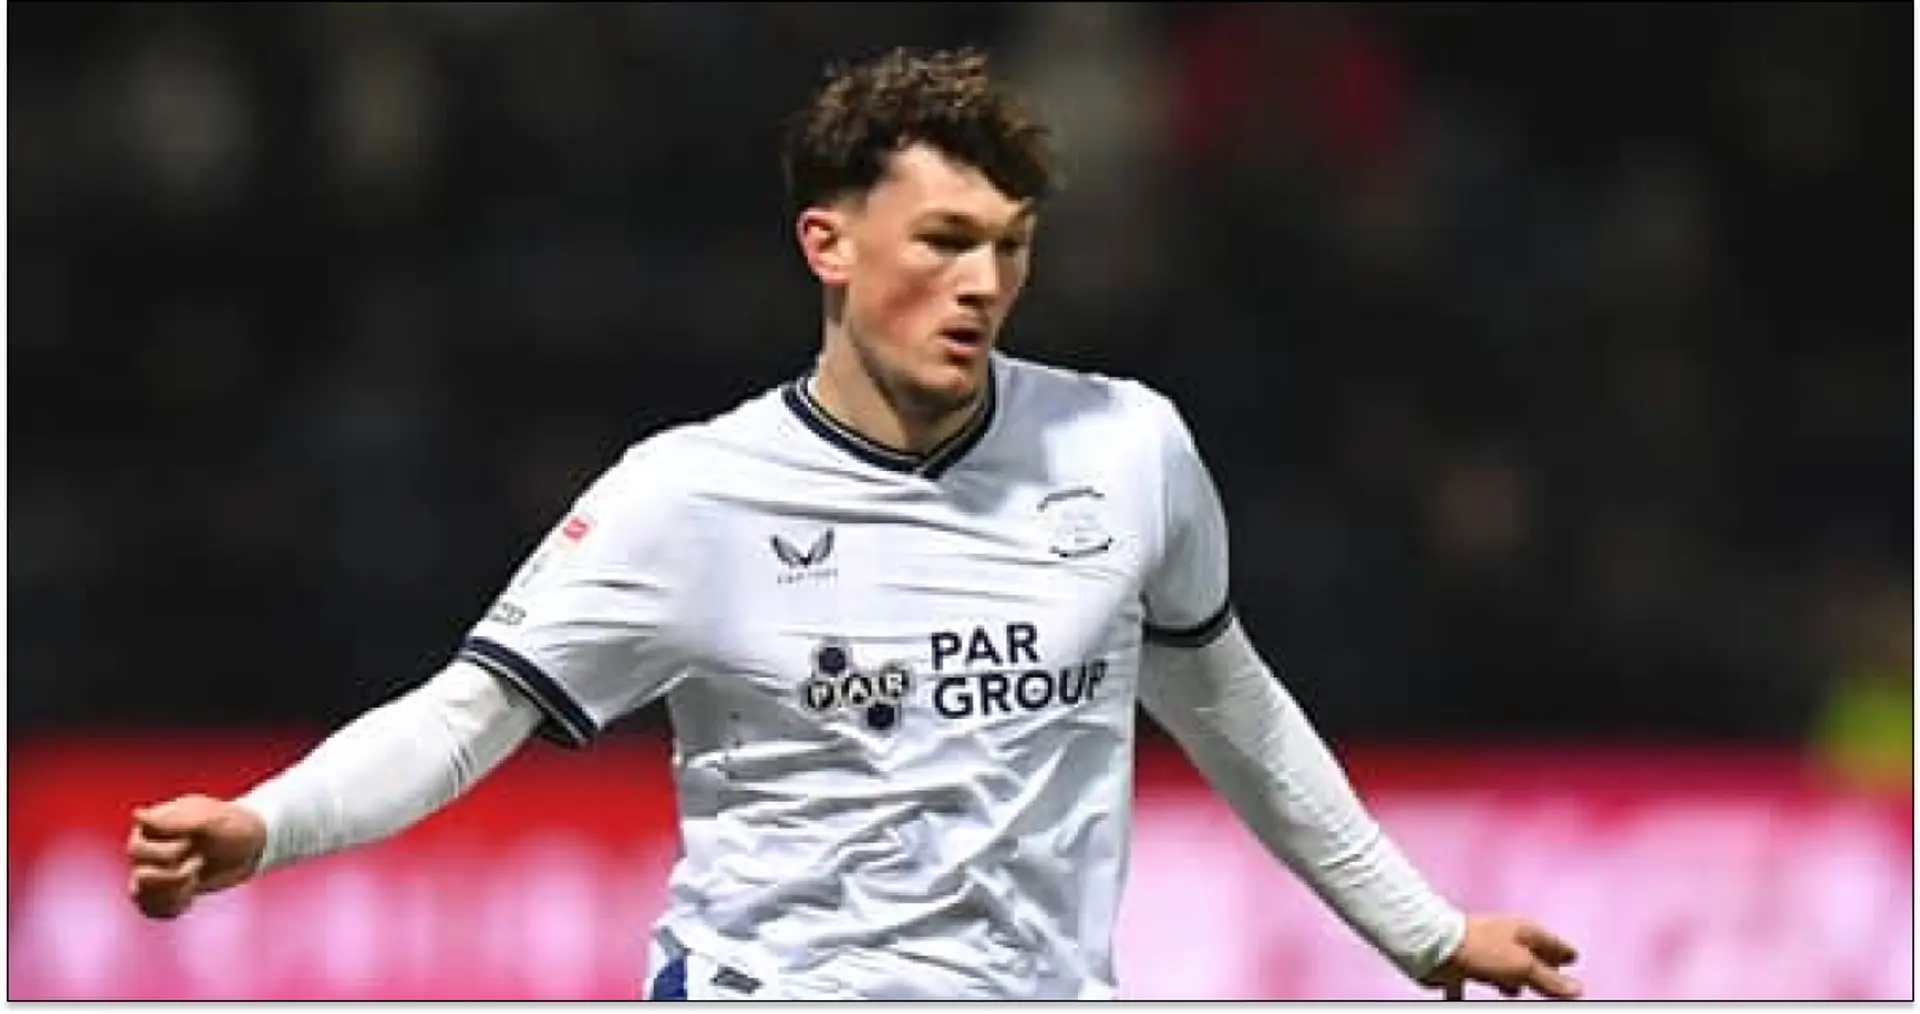 Liverpool loanee Ramsay has just 2 appearances for Preston despite being 'fit and available' — manager explains why